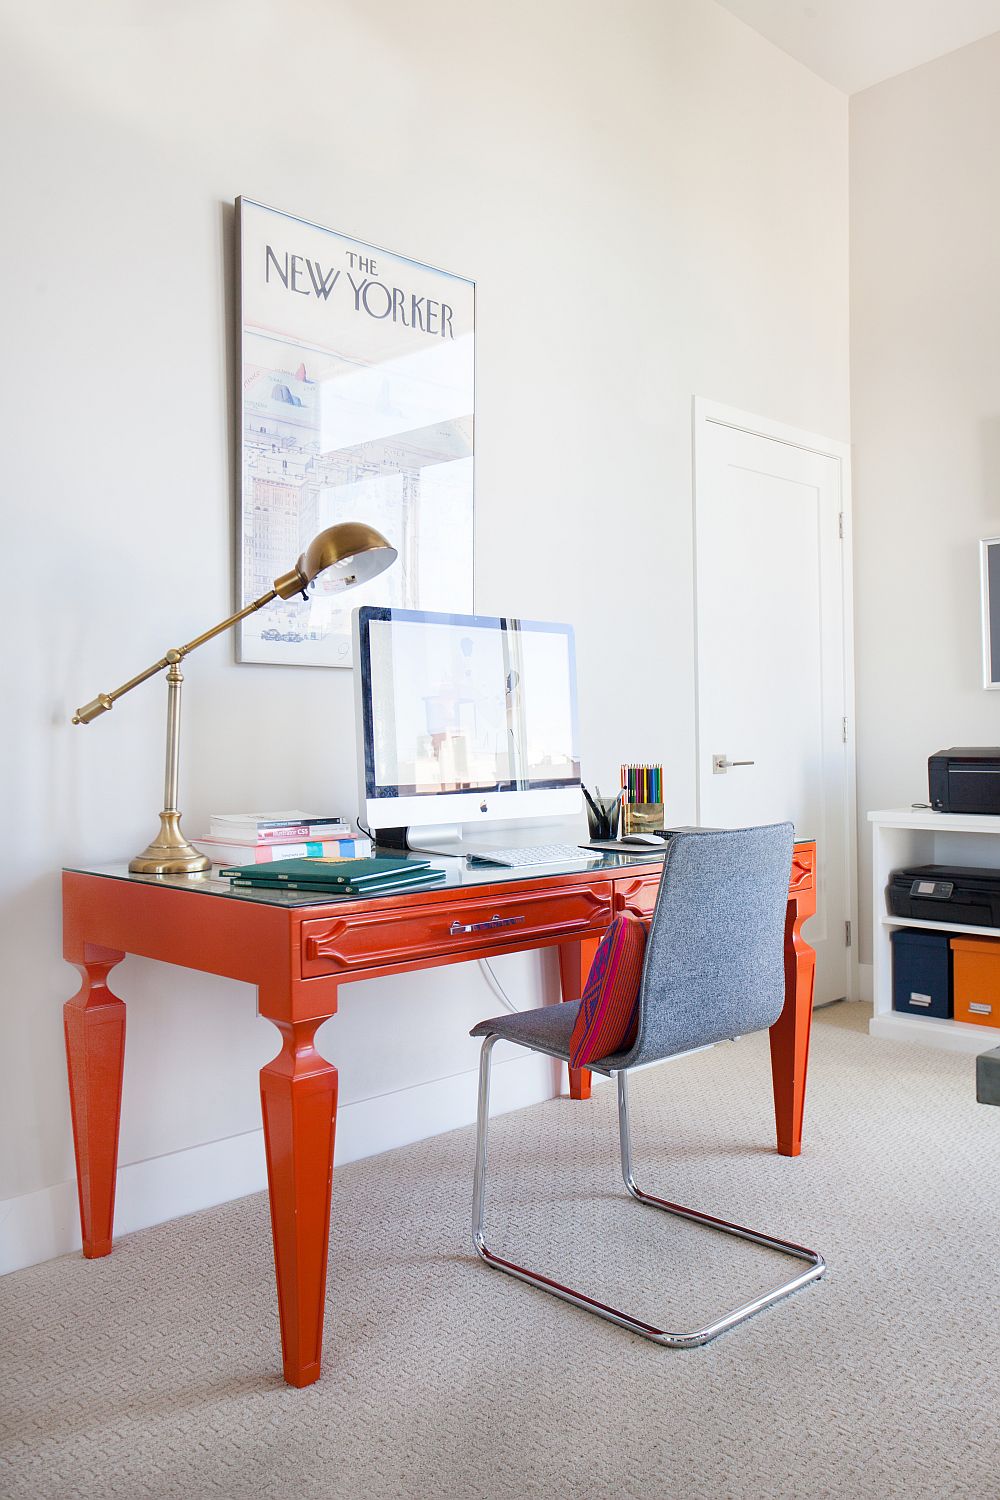 Add color to your home office even while keeping the backdrop neutral